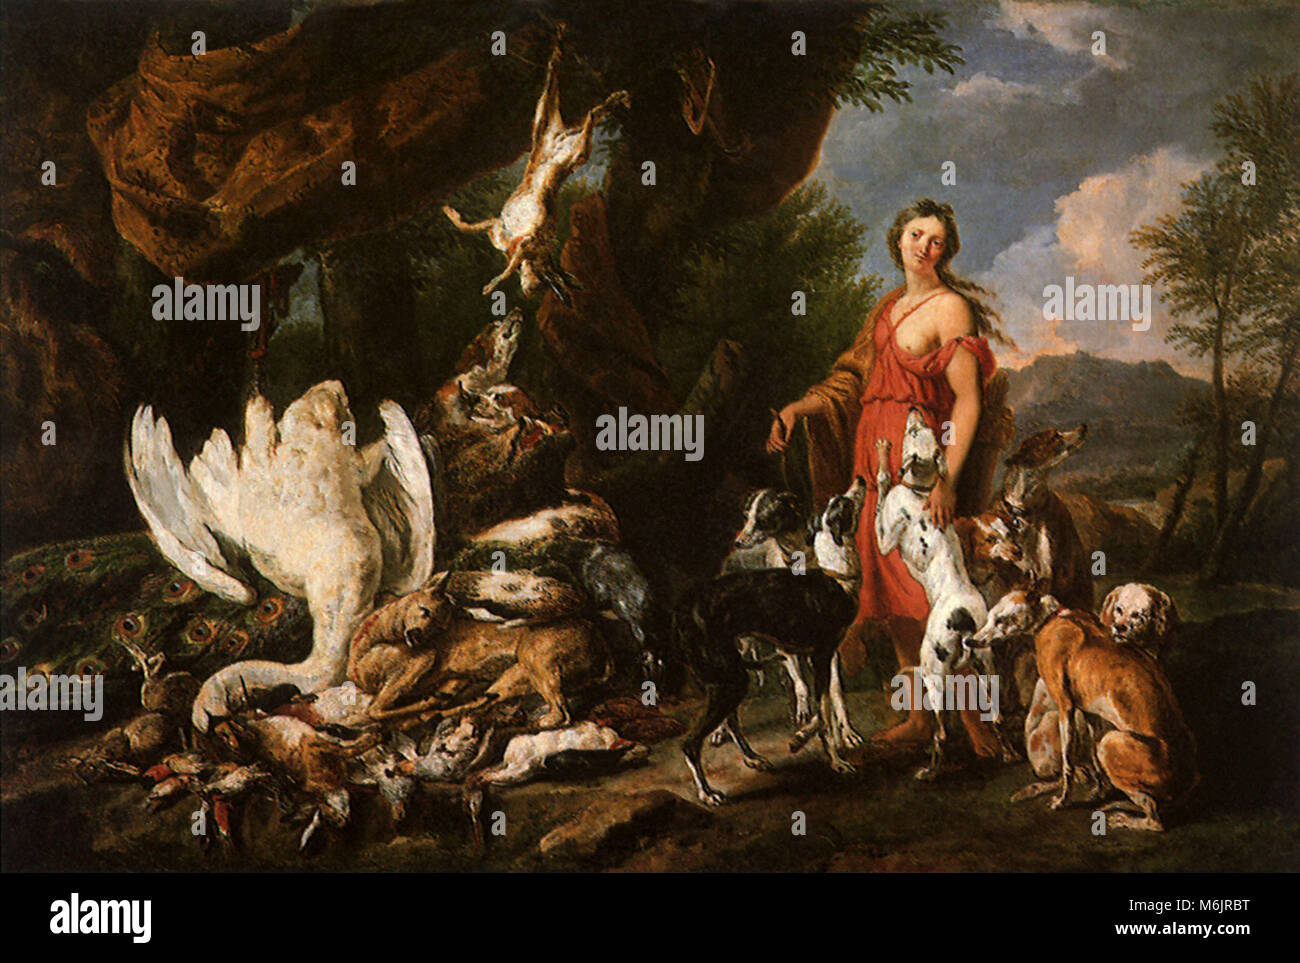 Diana with Her Hunting Dogs Beside Kill, Fyt, Jan, 1650. Stock Photo